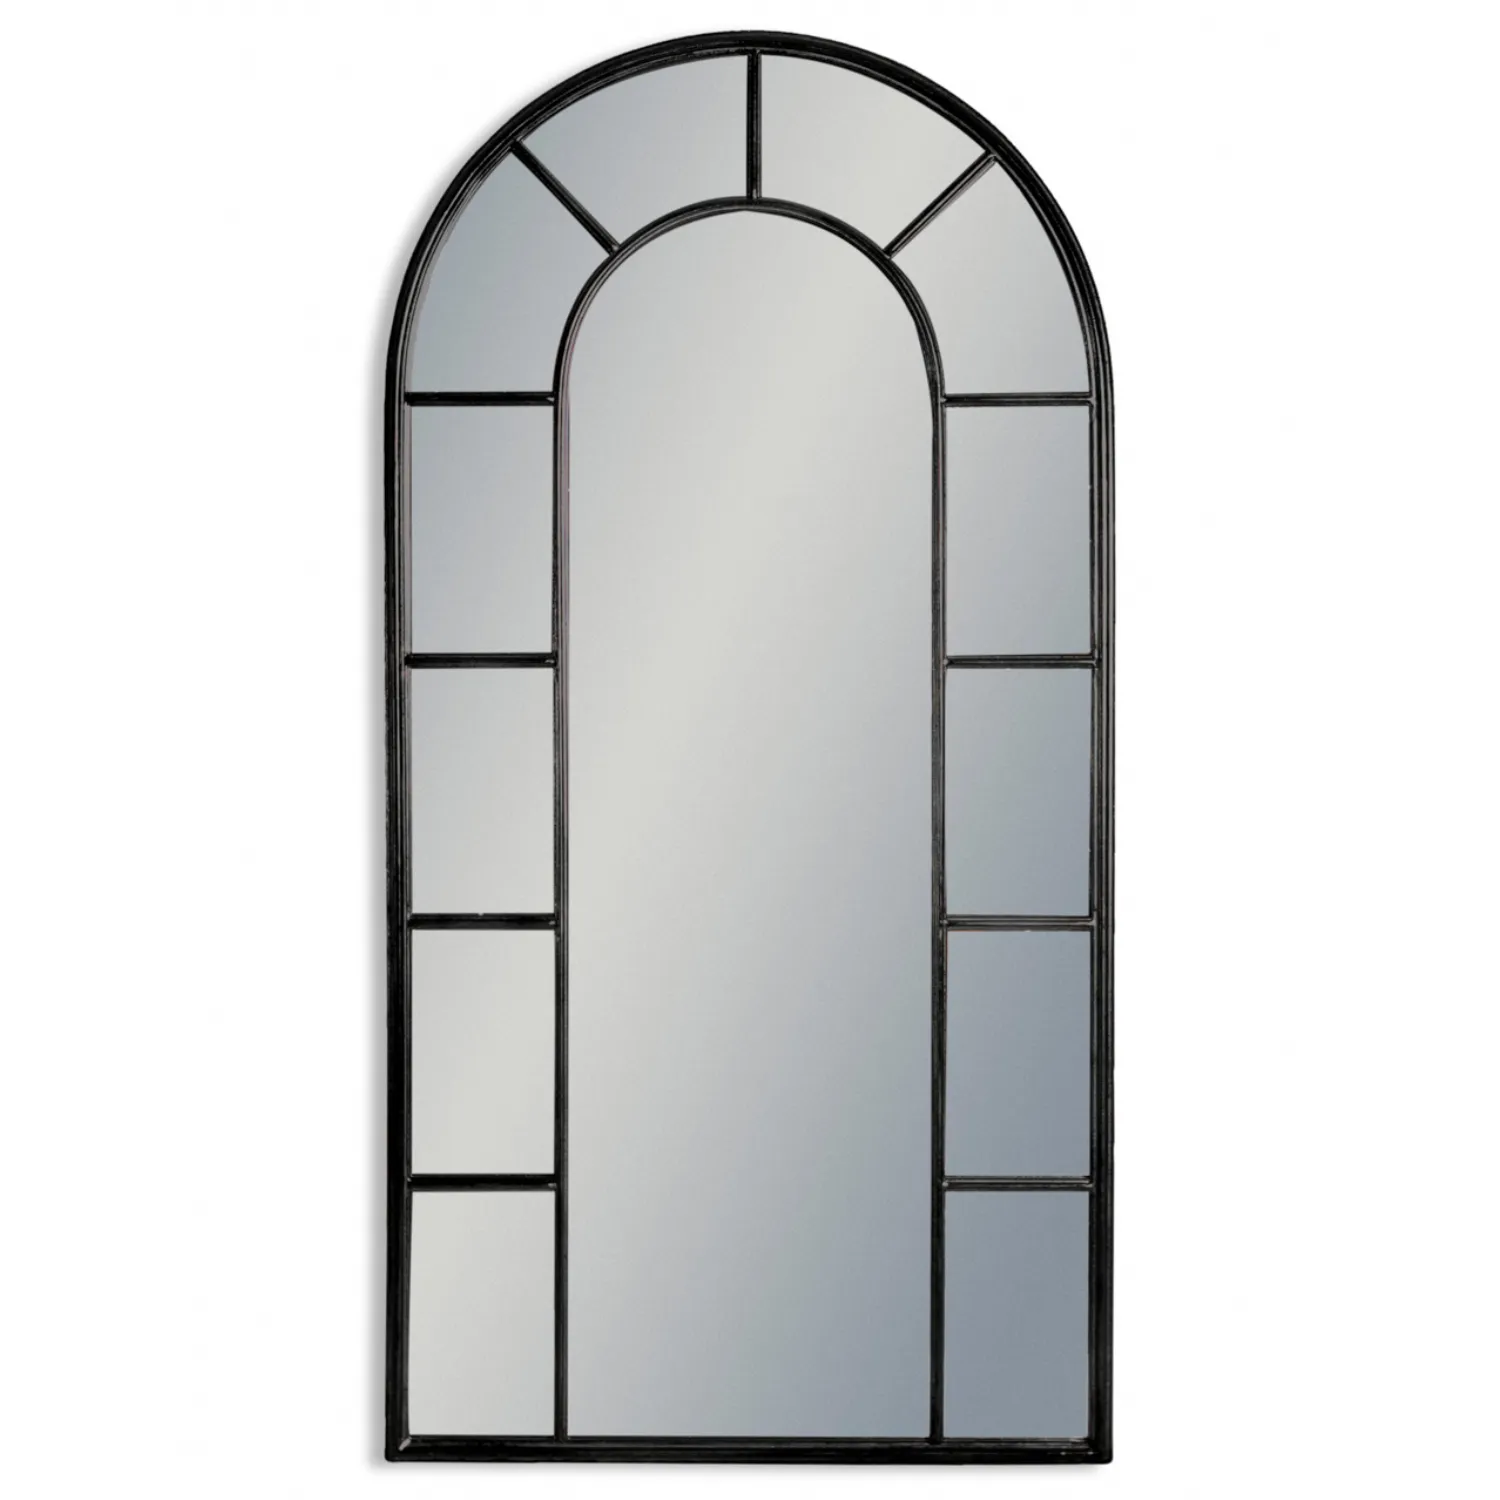 Black Arched Top Window Wall Mirror